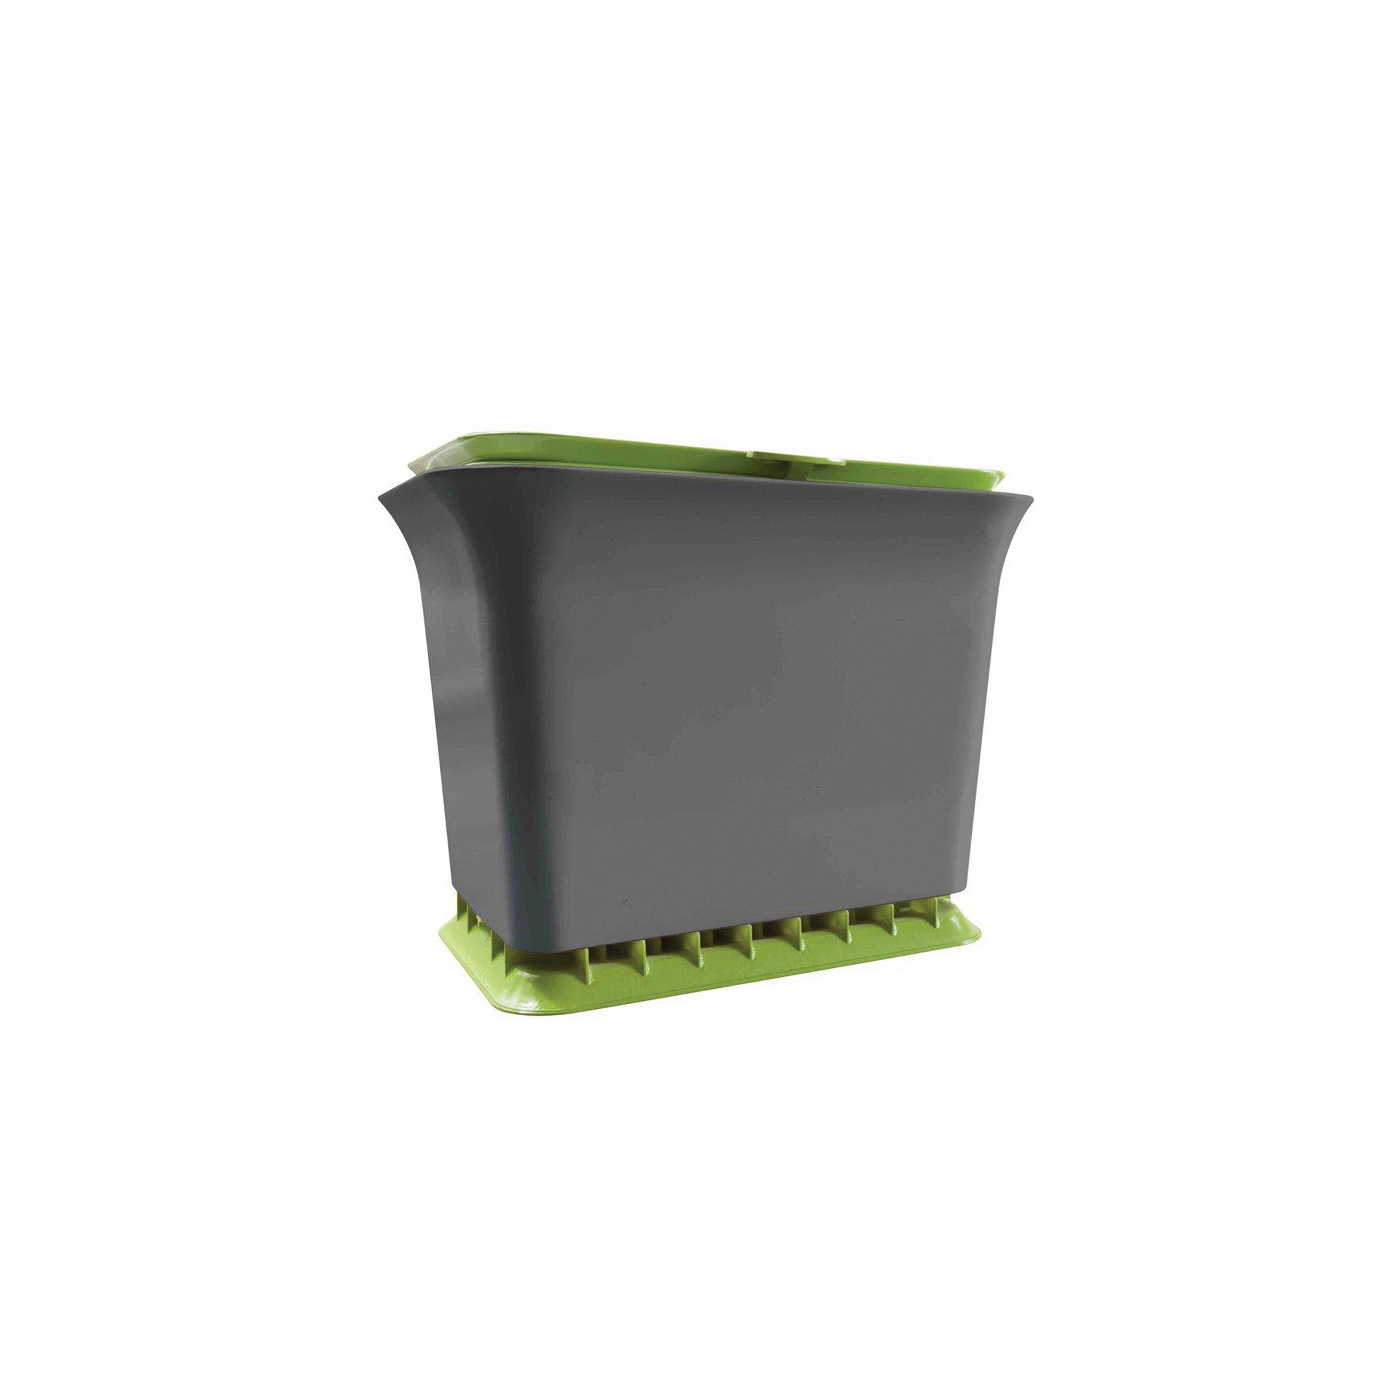 Full Circle FC11301-GS Compost Collector, 1.5 gal Capacity, Plastic/Steel, Green, 8-1/2 in W, 11.38 in D, 9 in H - 1